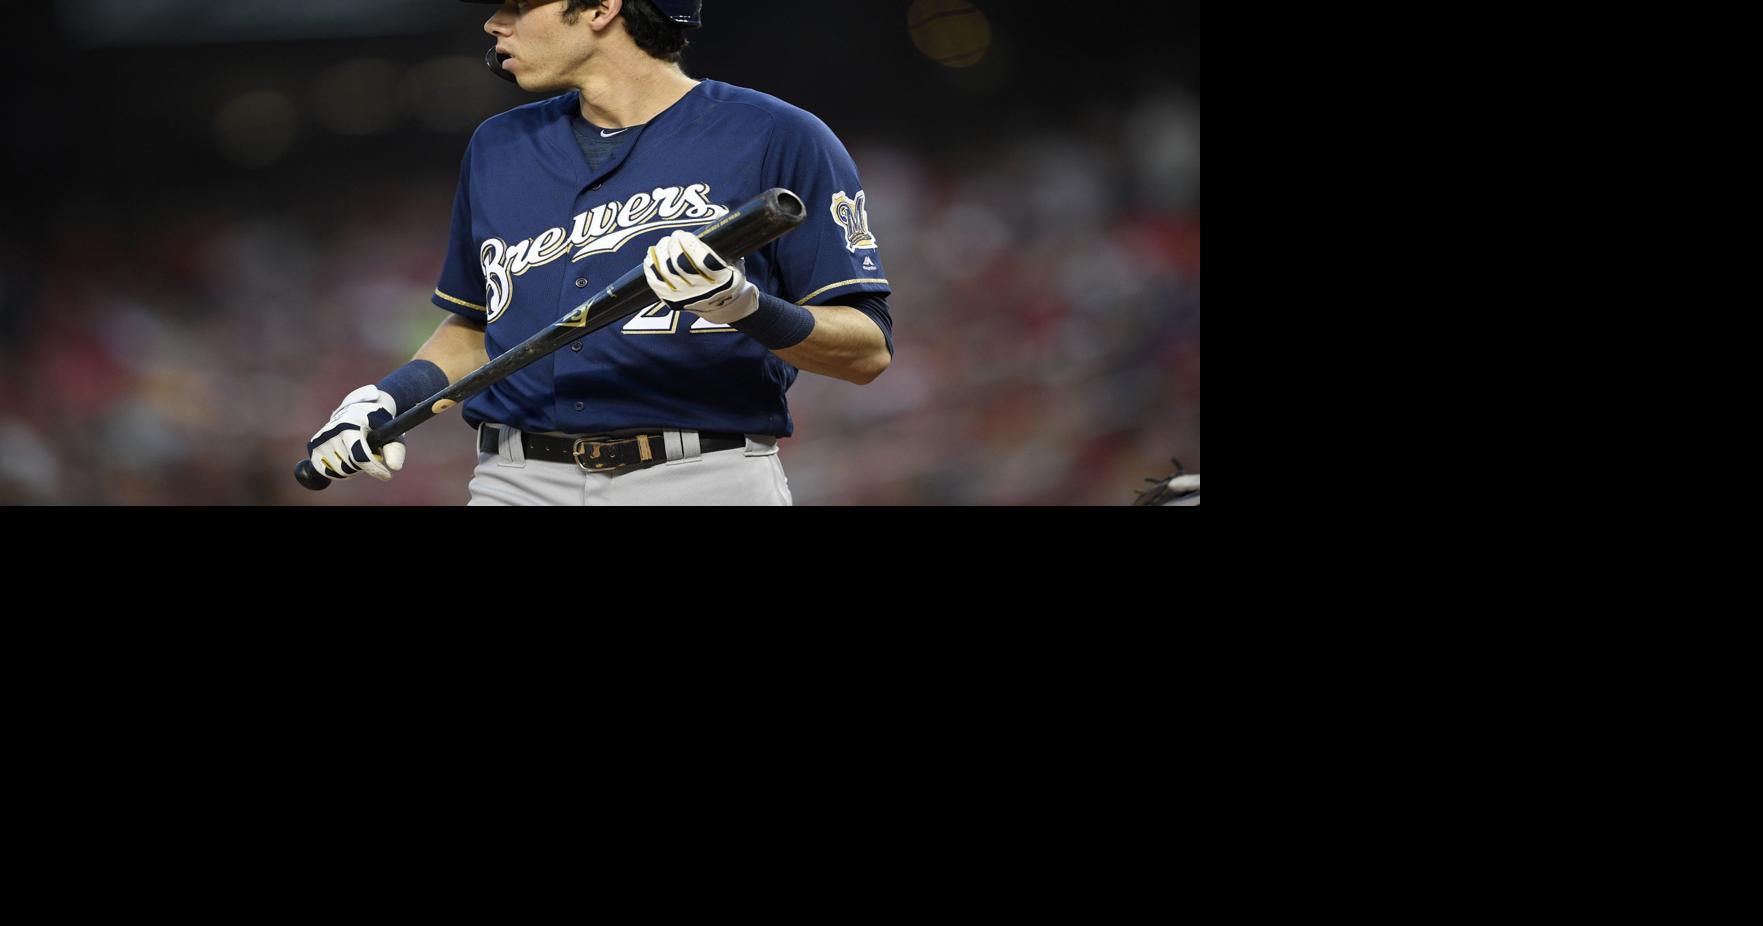 Brewers star Christian Yelich has fractured kneecap, will miss rest of  season - Chicago Sun-Times